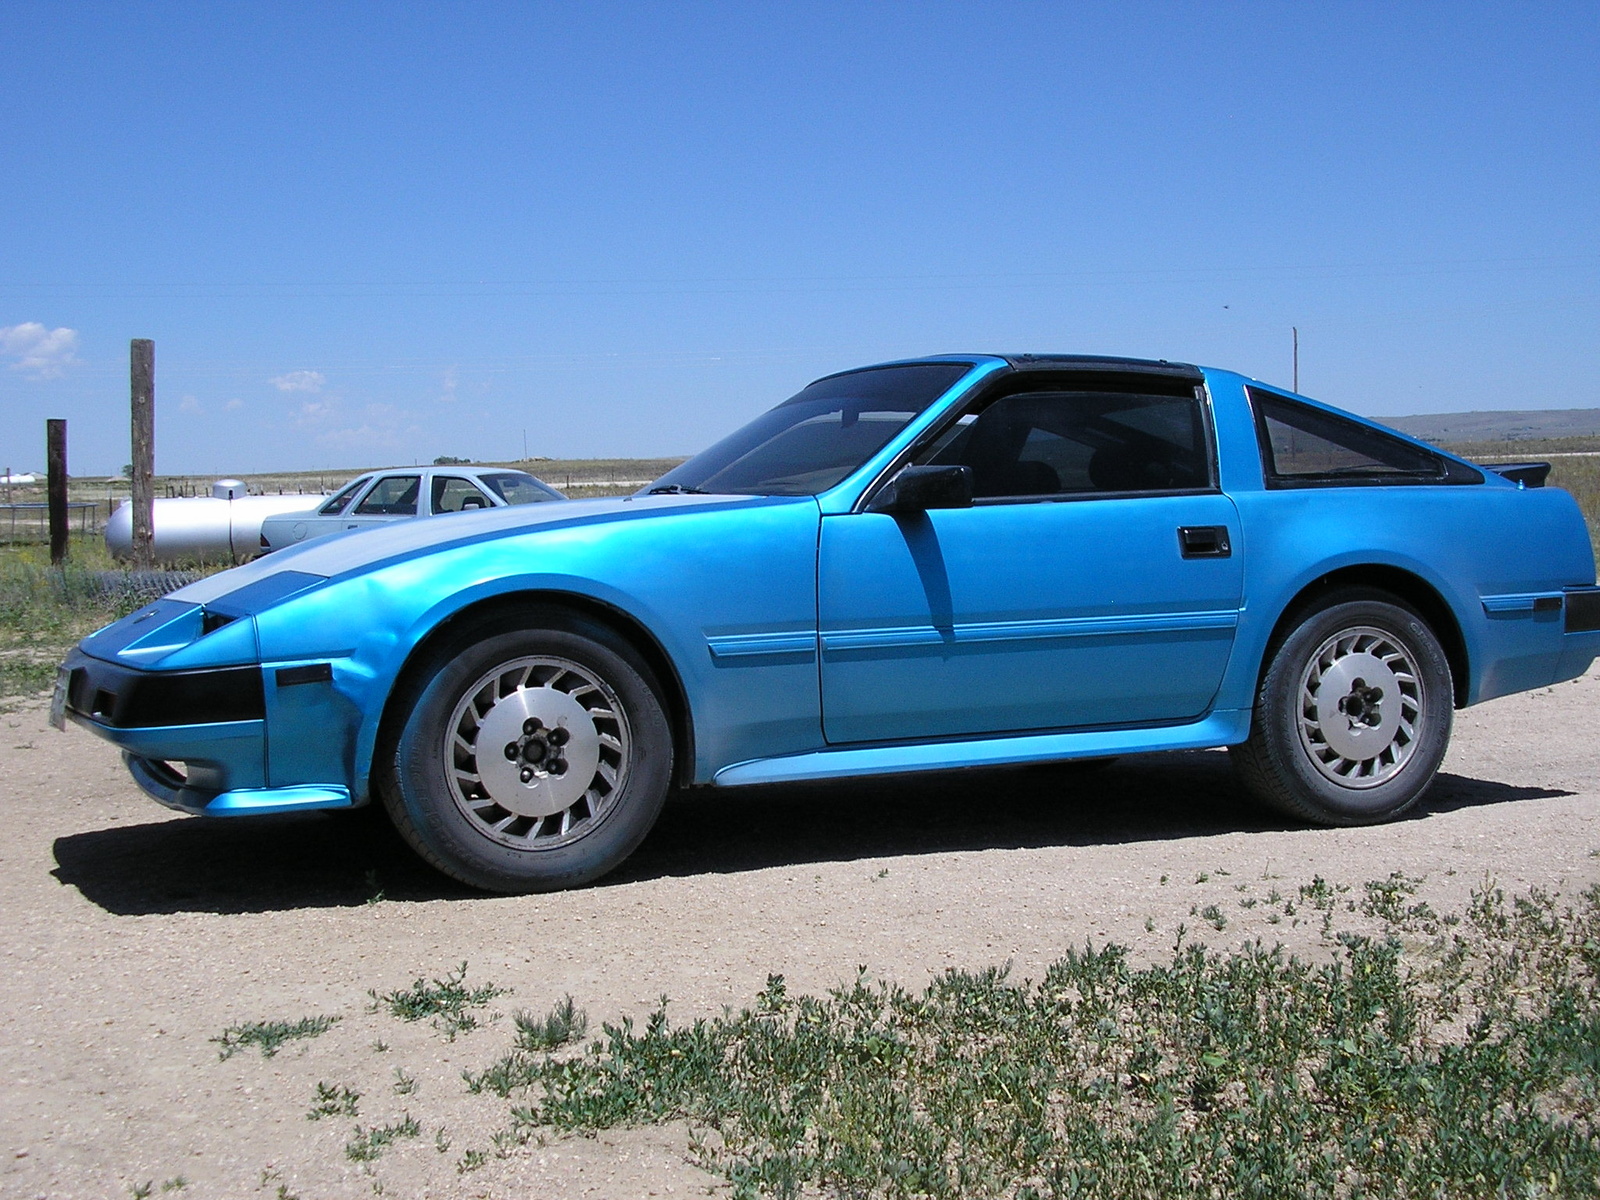 1986 Nissan 300zx turbo review #2